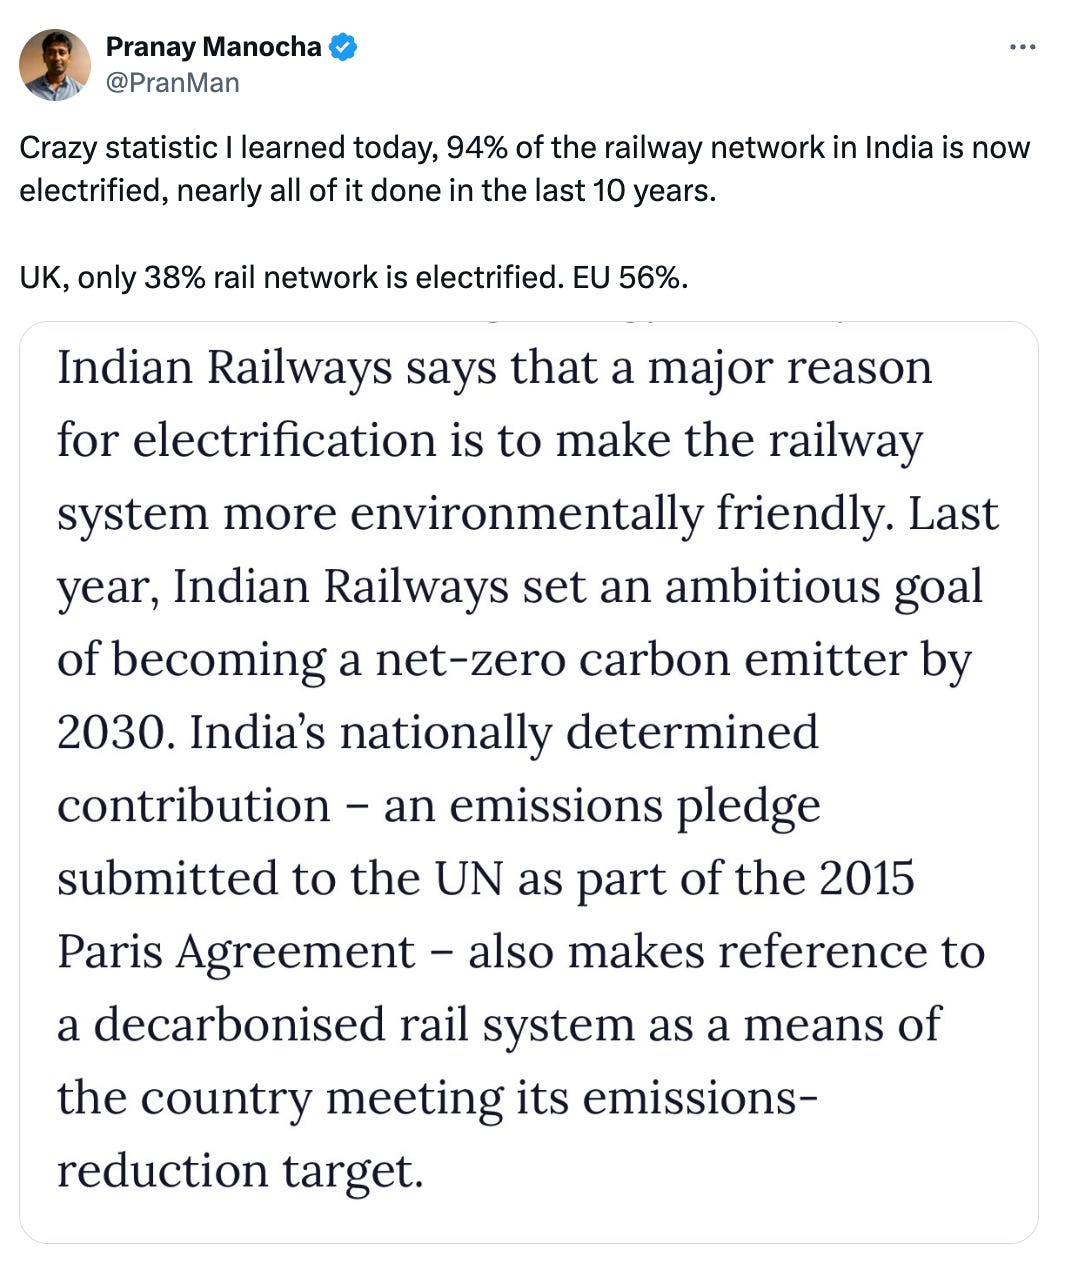  See new posts Conversation Pranay Manocha @PranMan Crazy statistic I learned today, 94% of the railway network in India is now electrified, nearly all of it done in the last 10 years.  UK, only 38% rail network is electrified. EU 56%.